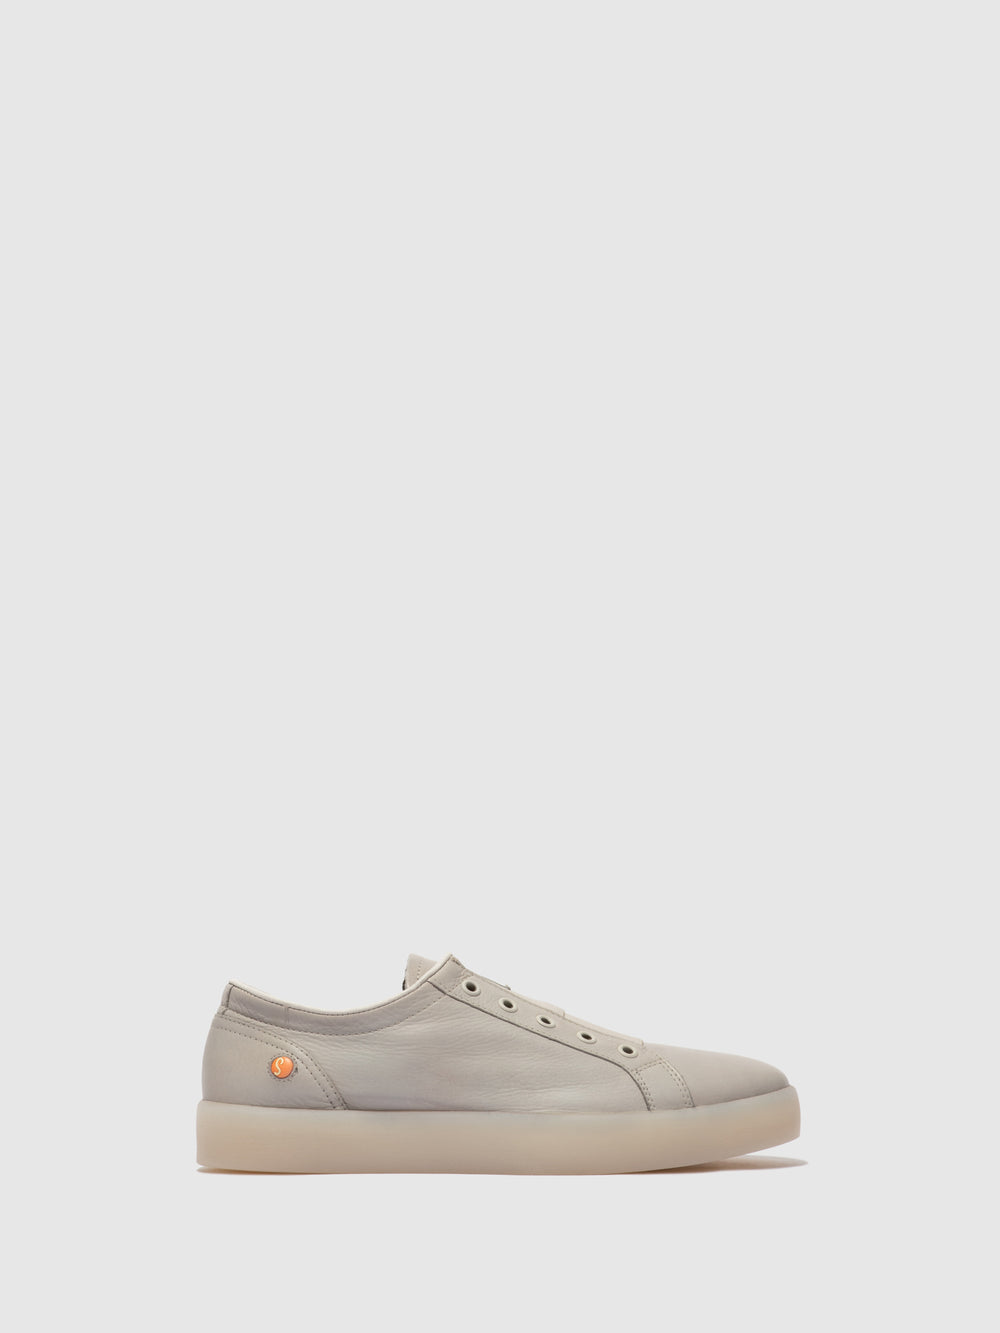 Slip-on Trainers RION647SOF SMOOTH LIGHT GREY